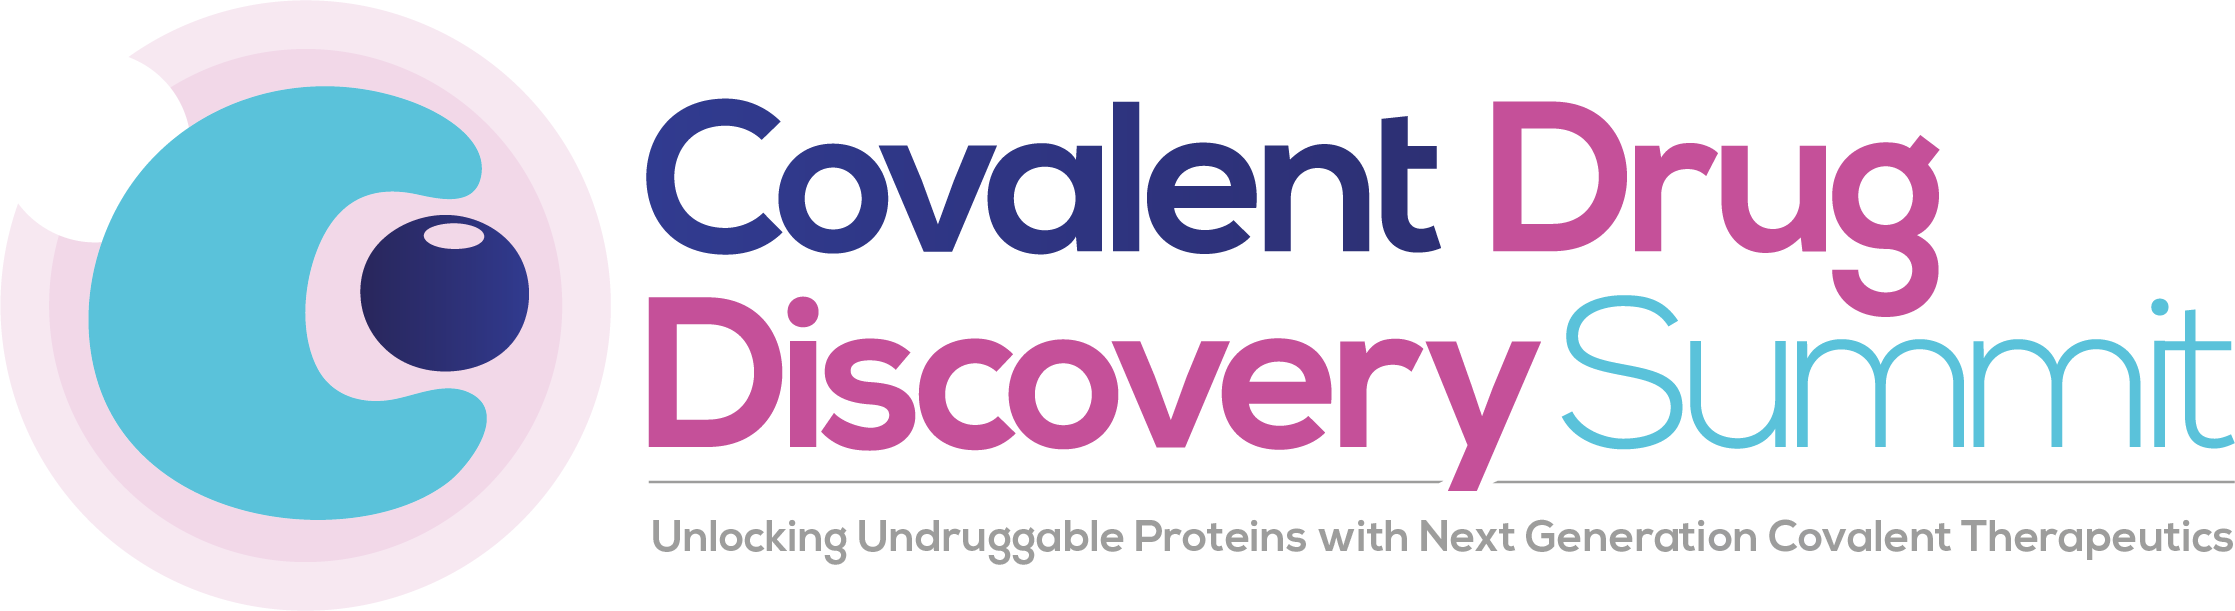 Covalent Drug Discovery Summit